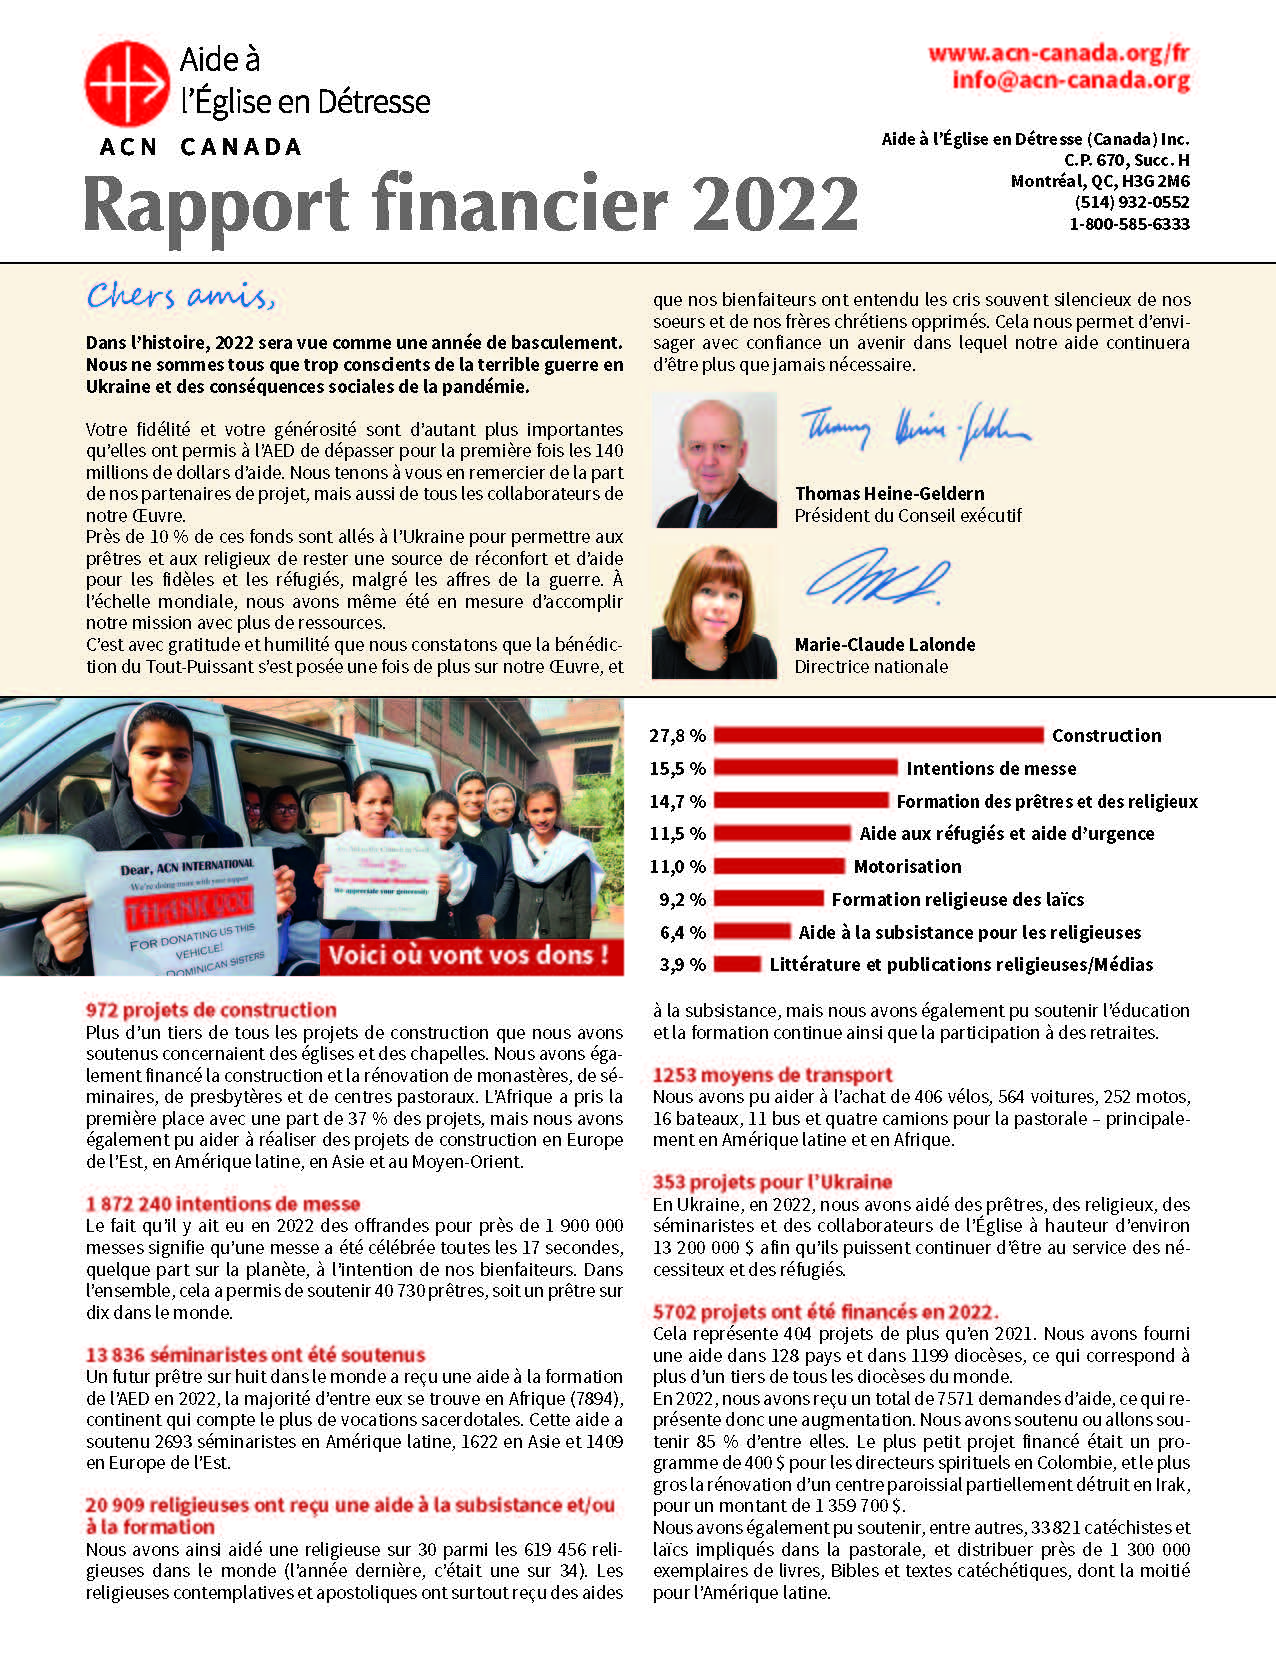 Rapport annuel 2023 AED